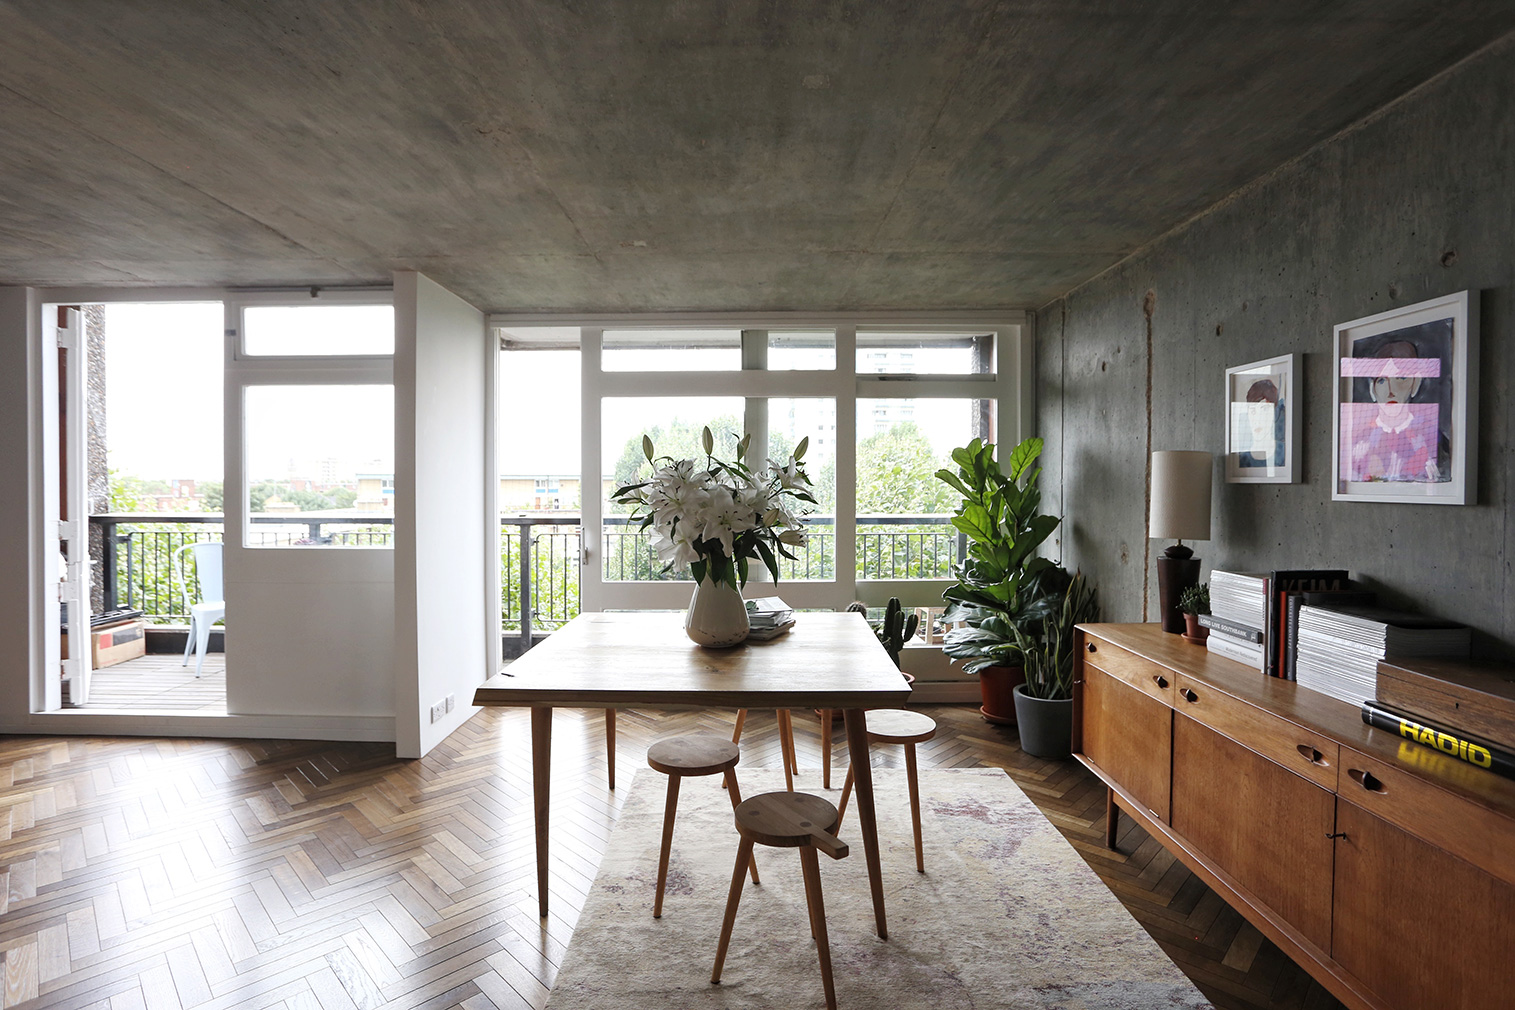 Industrial style is elevated with polished timber and steel in this London apartment, which lies in Ernö Goldfinger’s brutalist icon Trellick Tower.